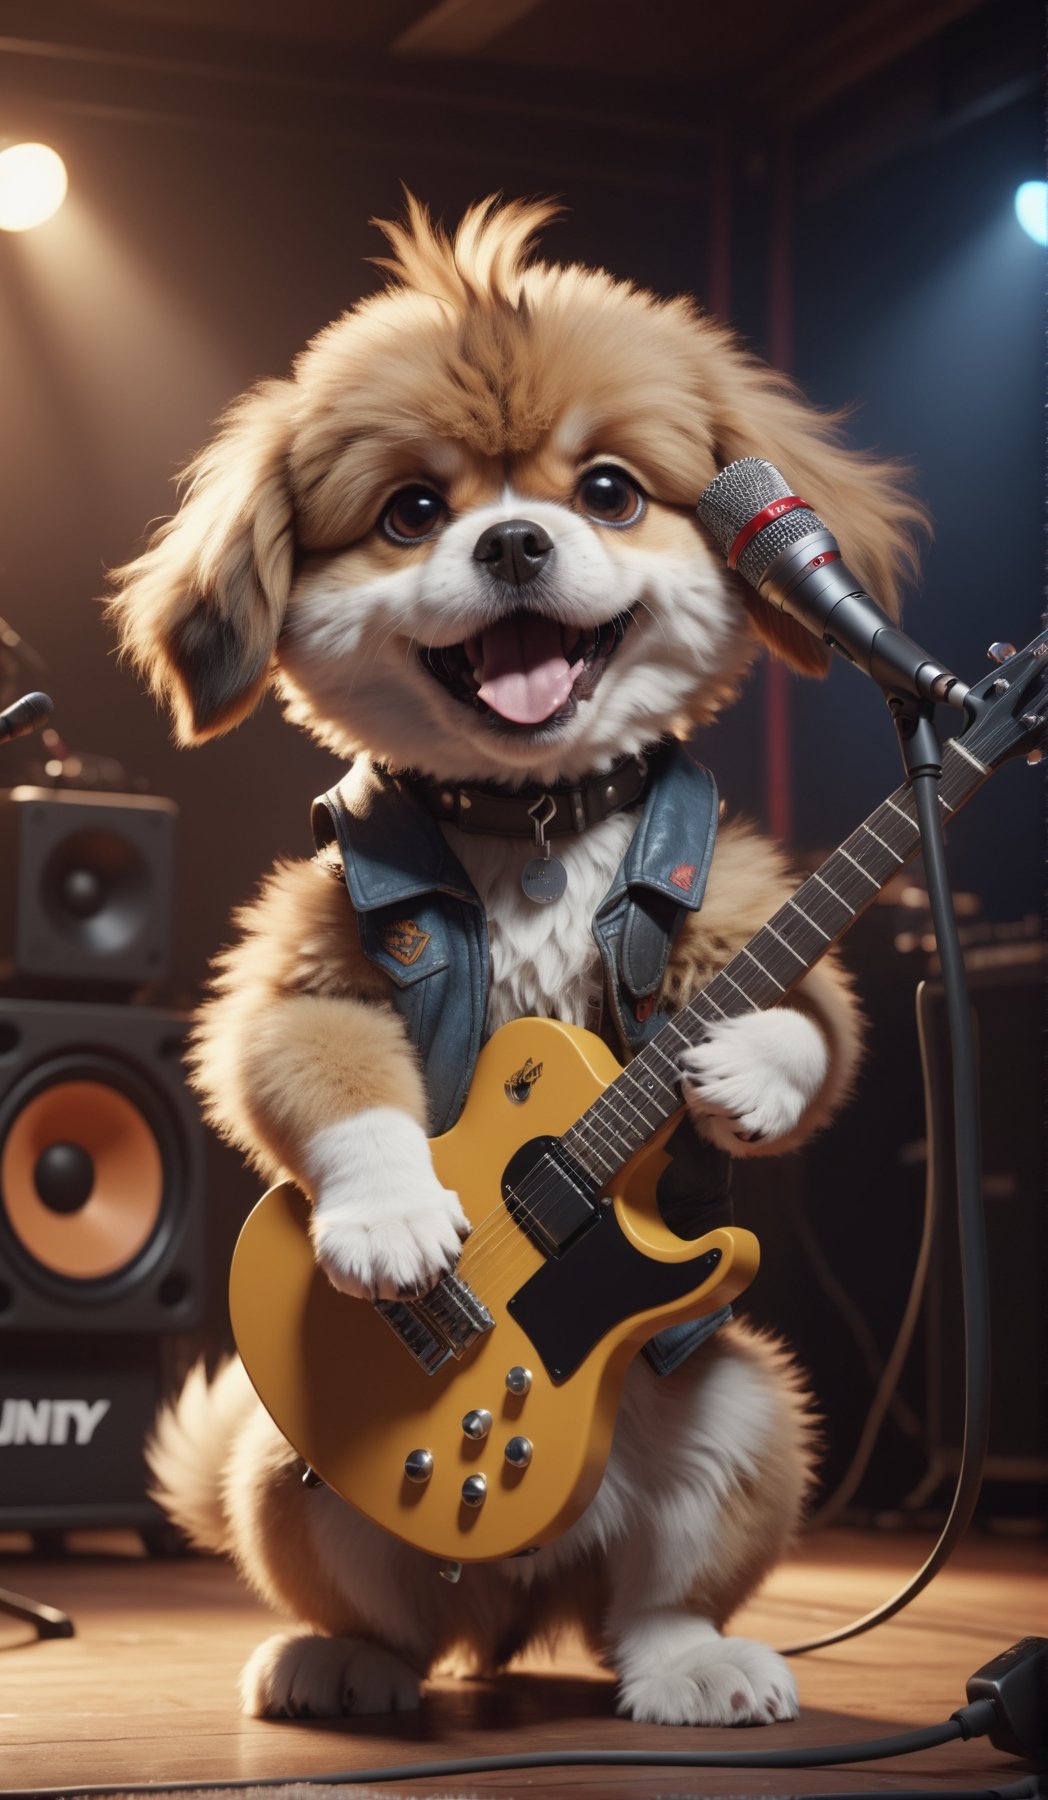 8K, Ultra-HD, Natural Lighting, Moody Lighting, Cinematic Lighting,detailed,CG,unity,extremely detailed CG,
solo,cute dog,A fluffy hardrock dog guitarist, brutally and violently screaming into his microphone, 